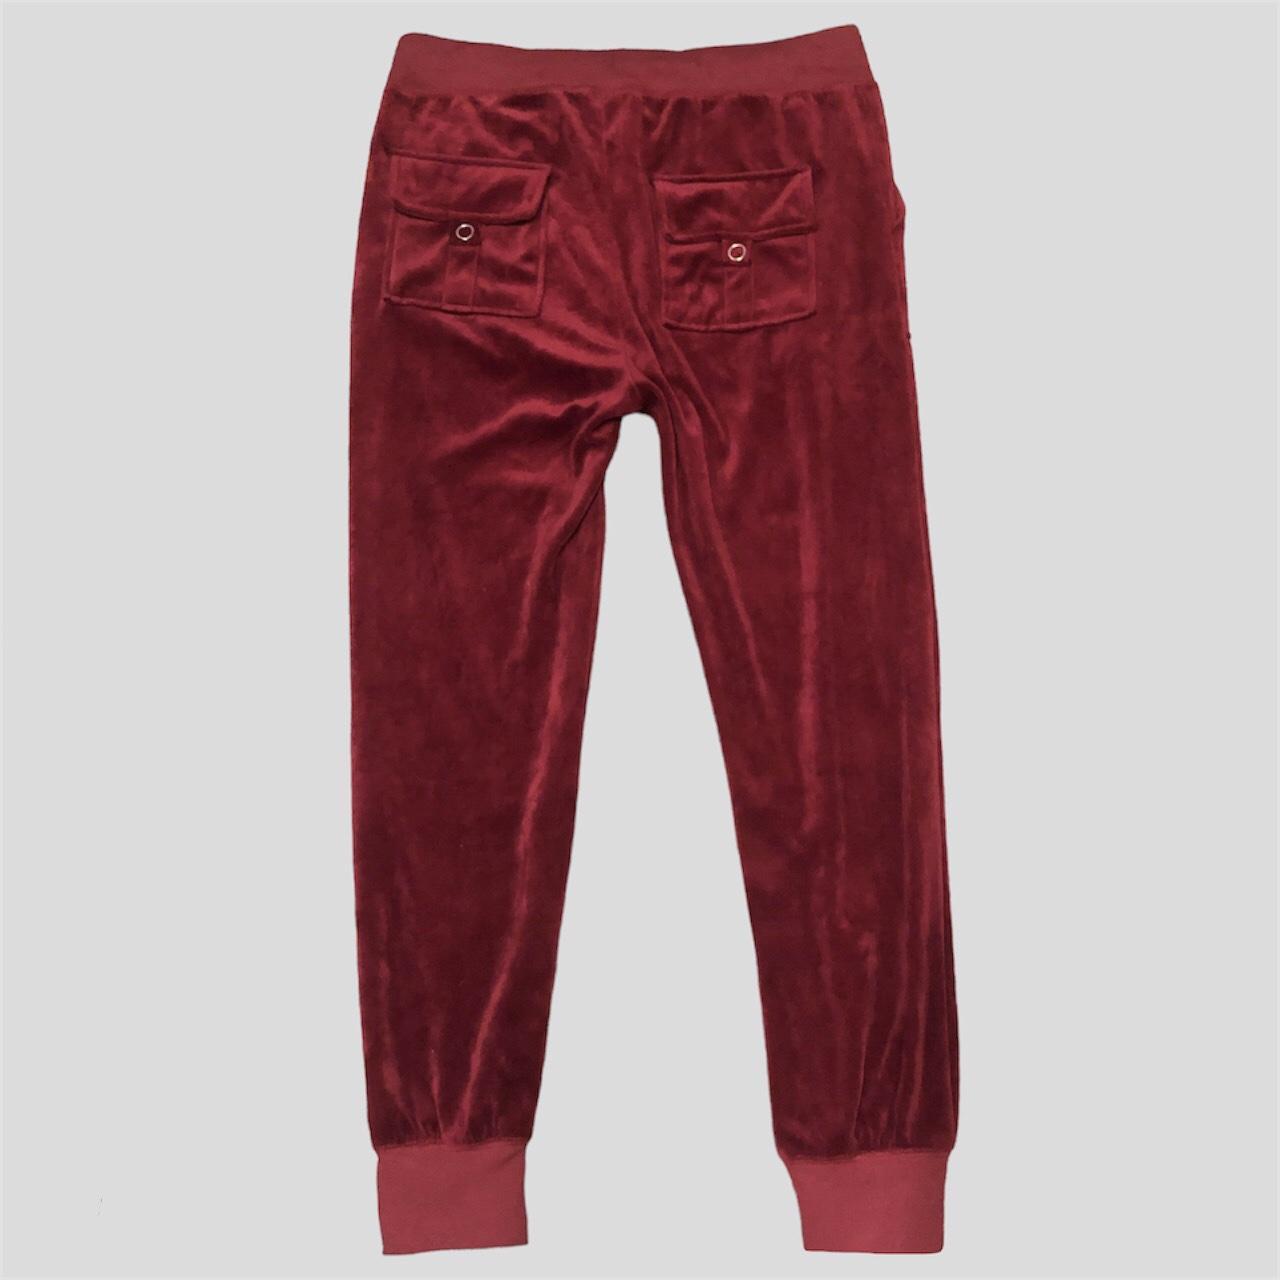 Juicy Couture Women's Red and Black Trousers (2)